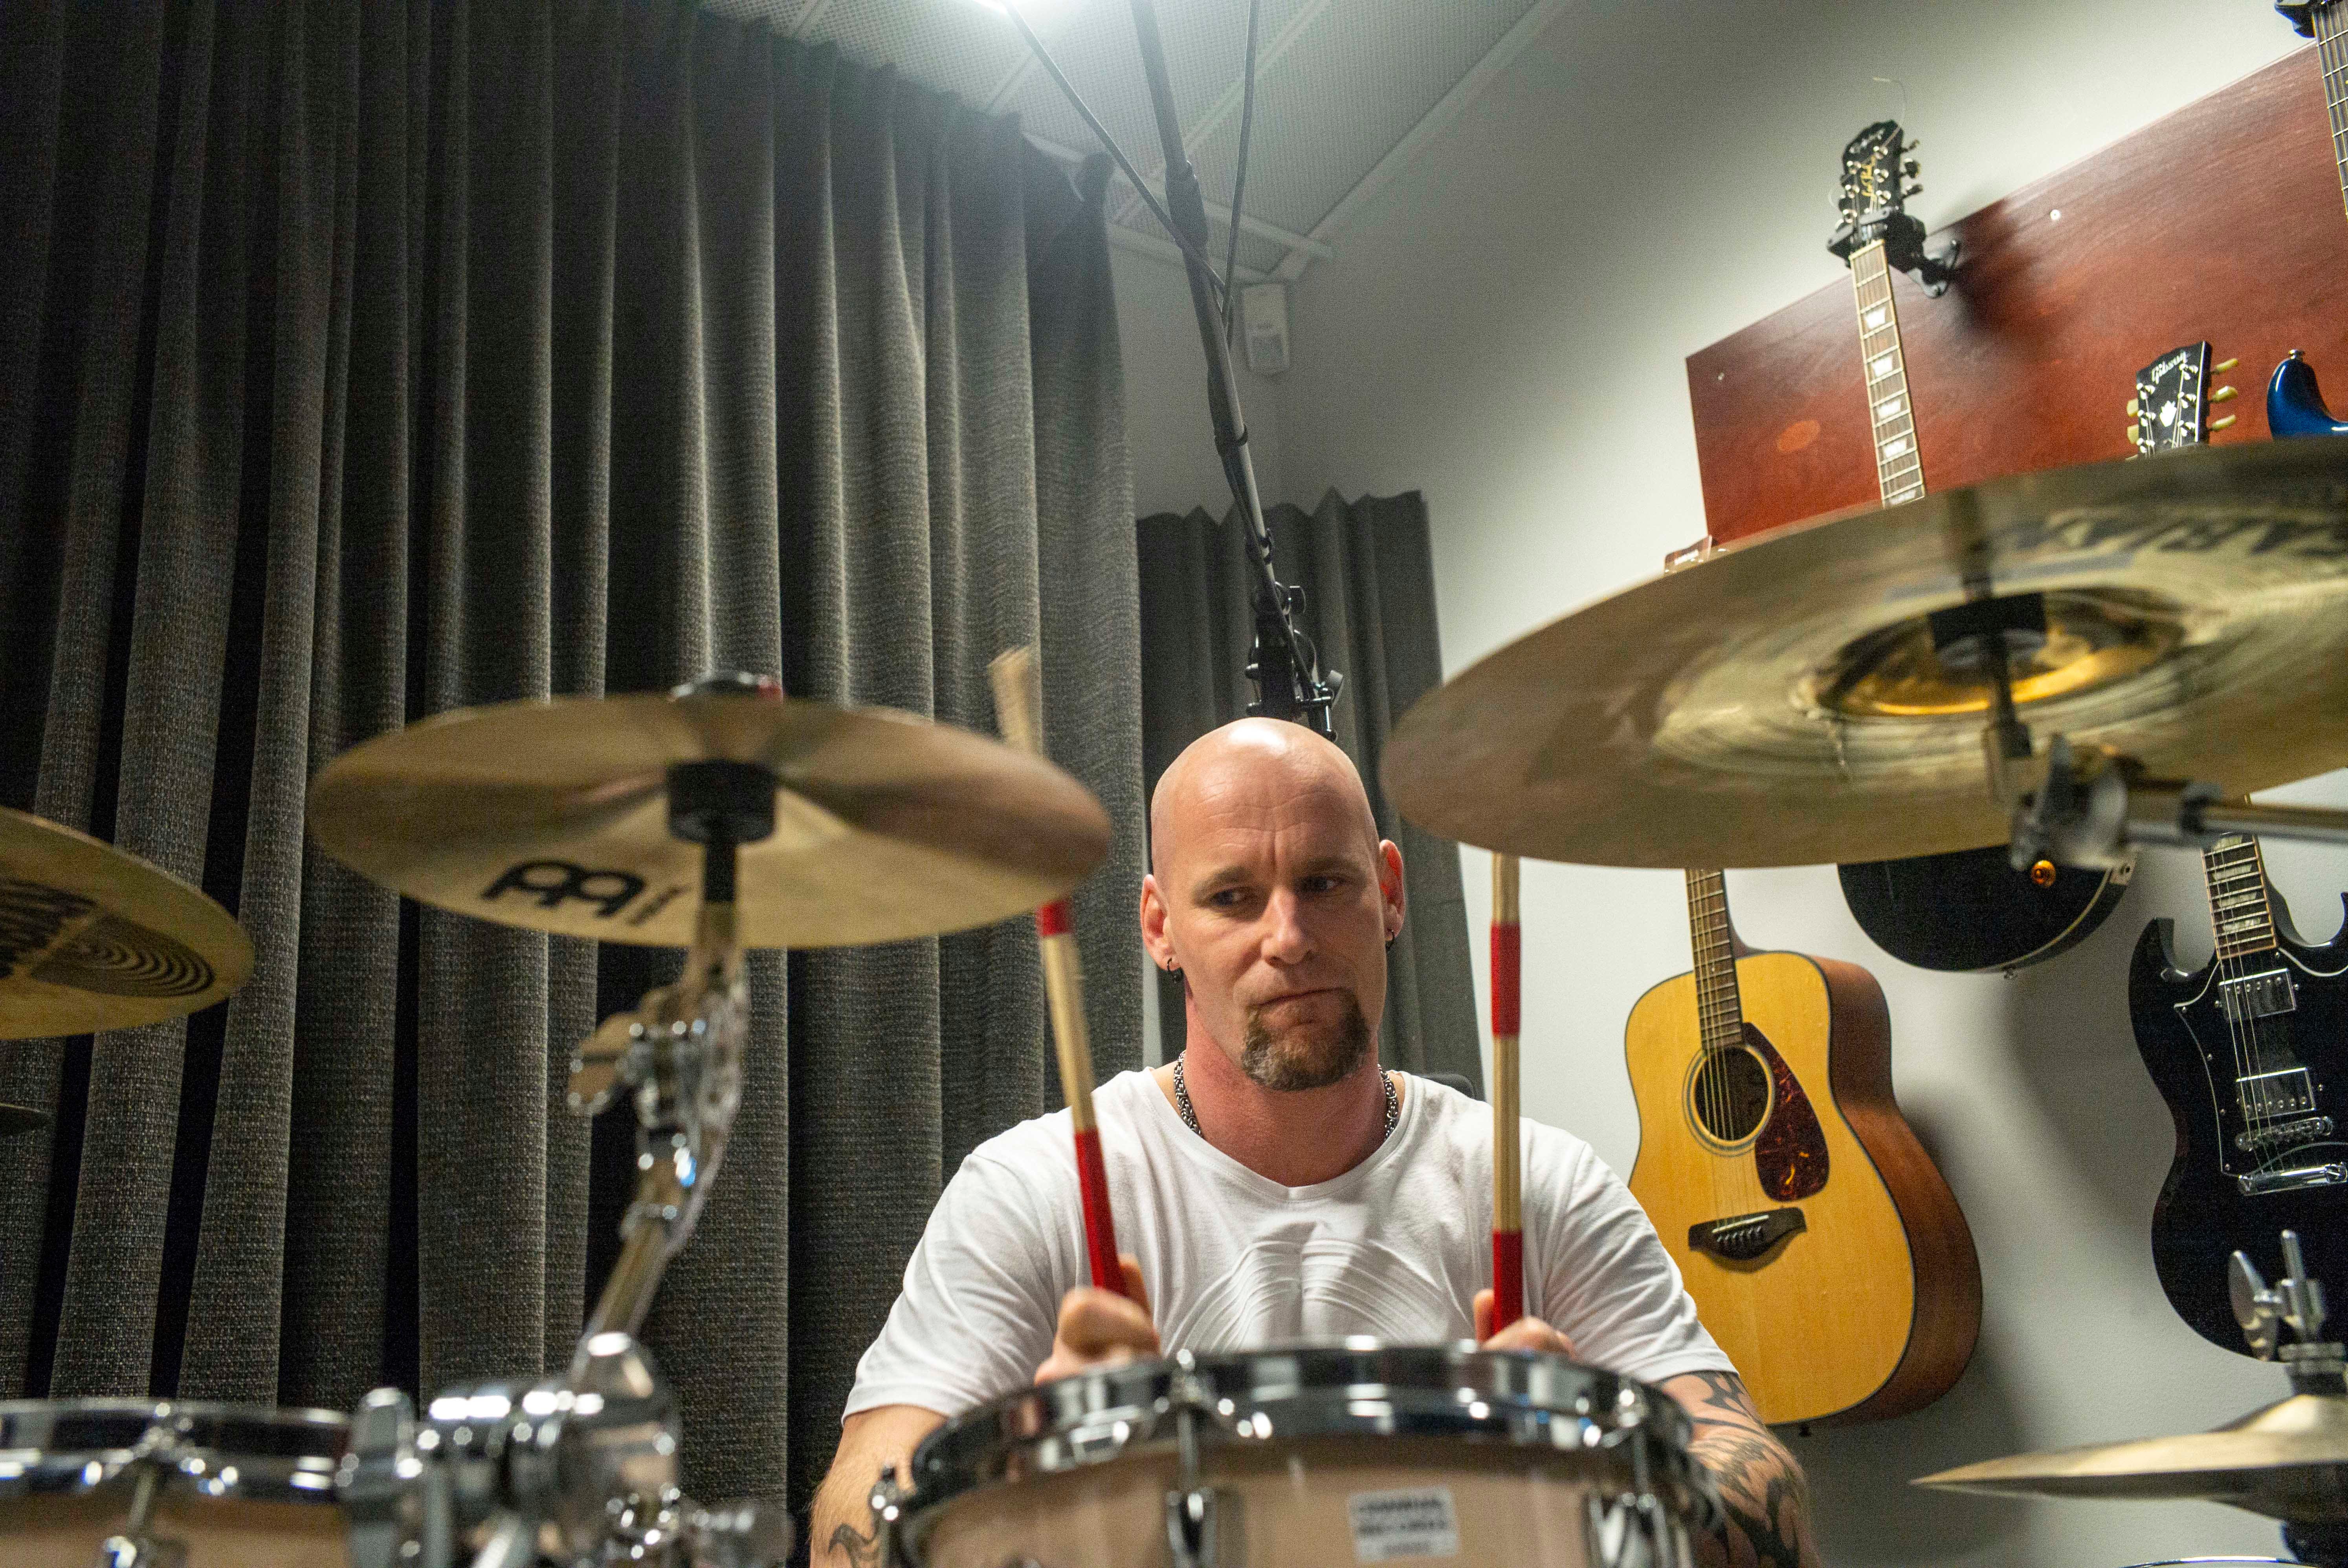 Inmate Mike, who didn ' t give his last name, plays the drums at Halden Prison in Norway. He ' s from the Netherlands and among 40% of Halden prisoners who come from foreign countries.